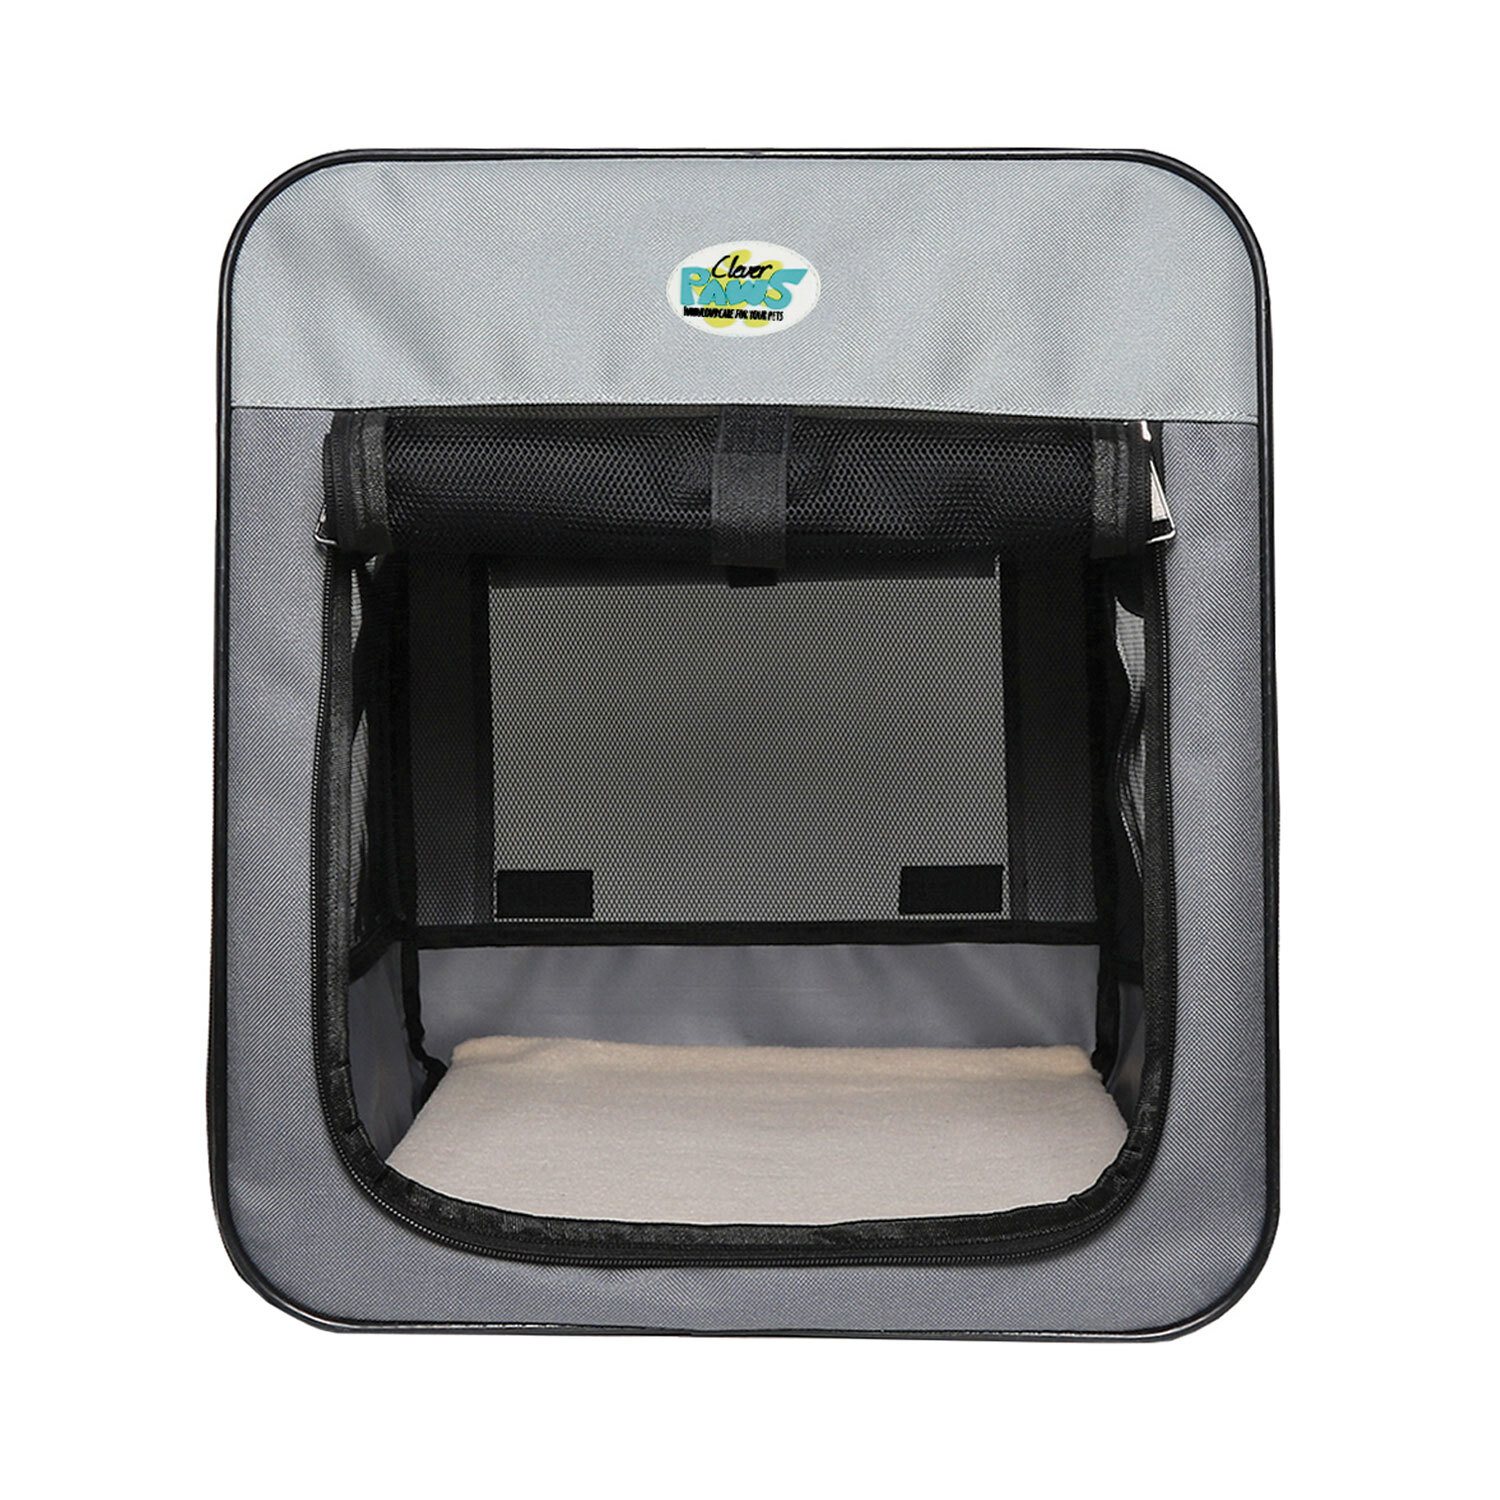 Clever Paws Medium Soft Pet Kennel Image 6